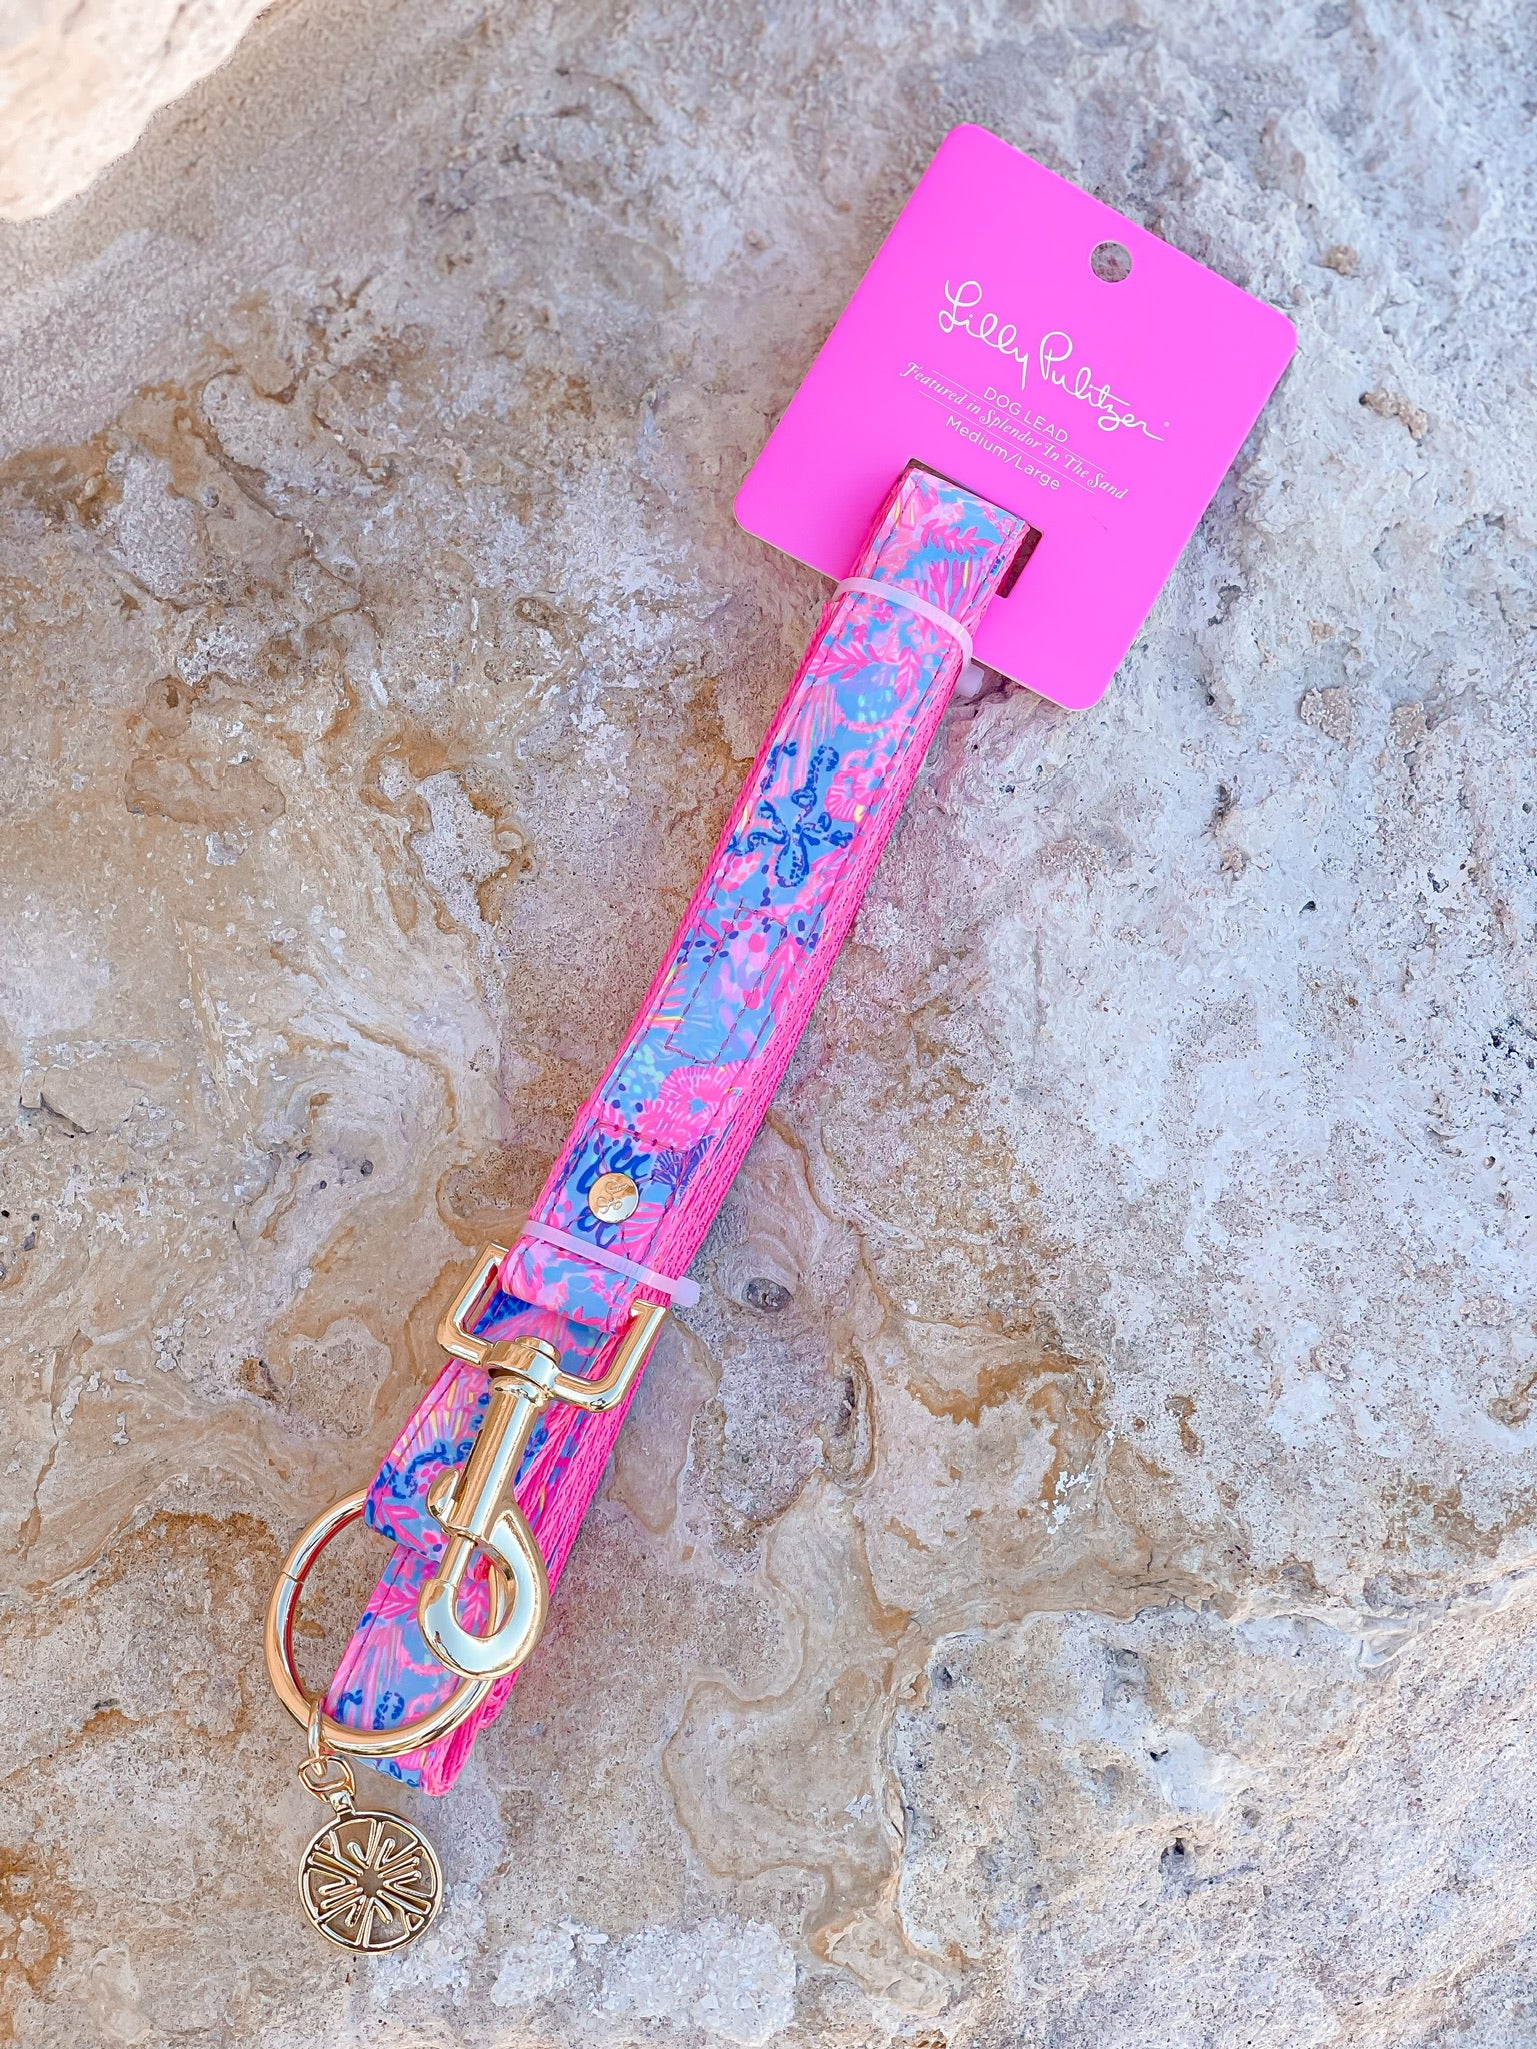 Dog Leash by Lilly Pulitzer - Splendor in the Sand (M/L)